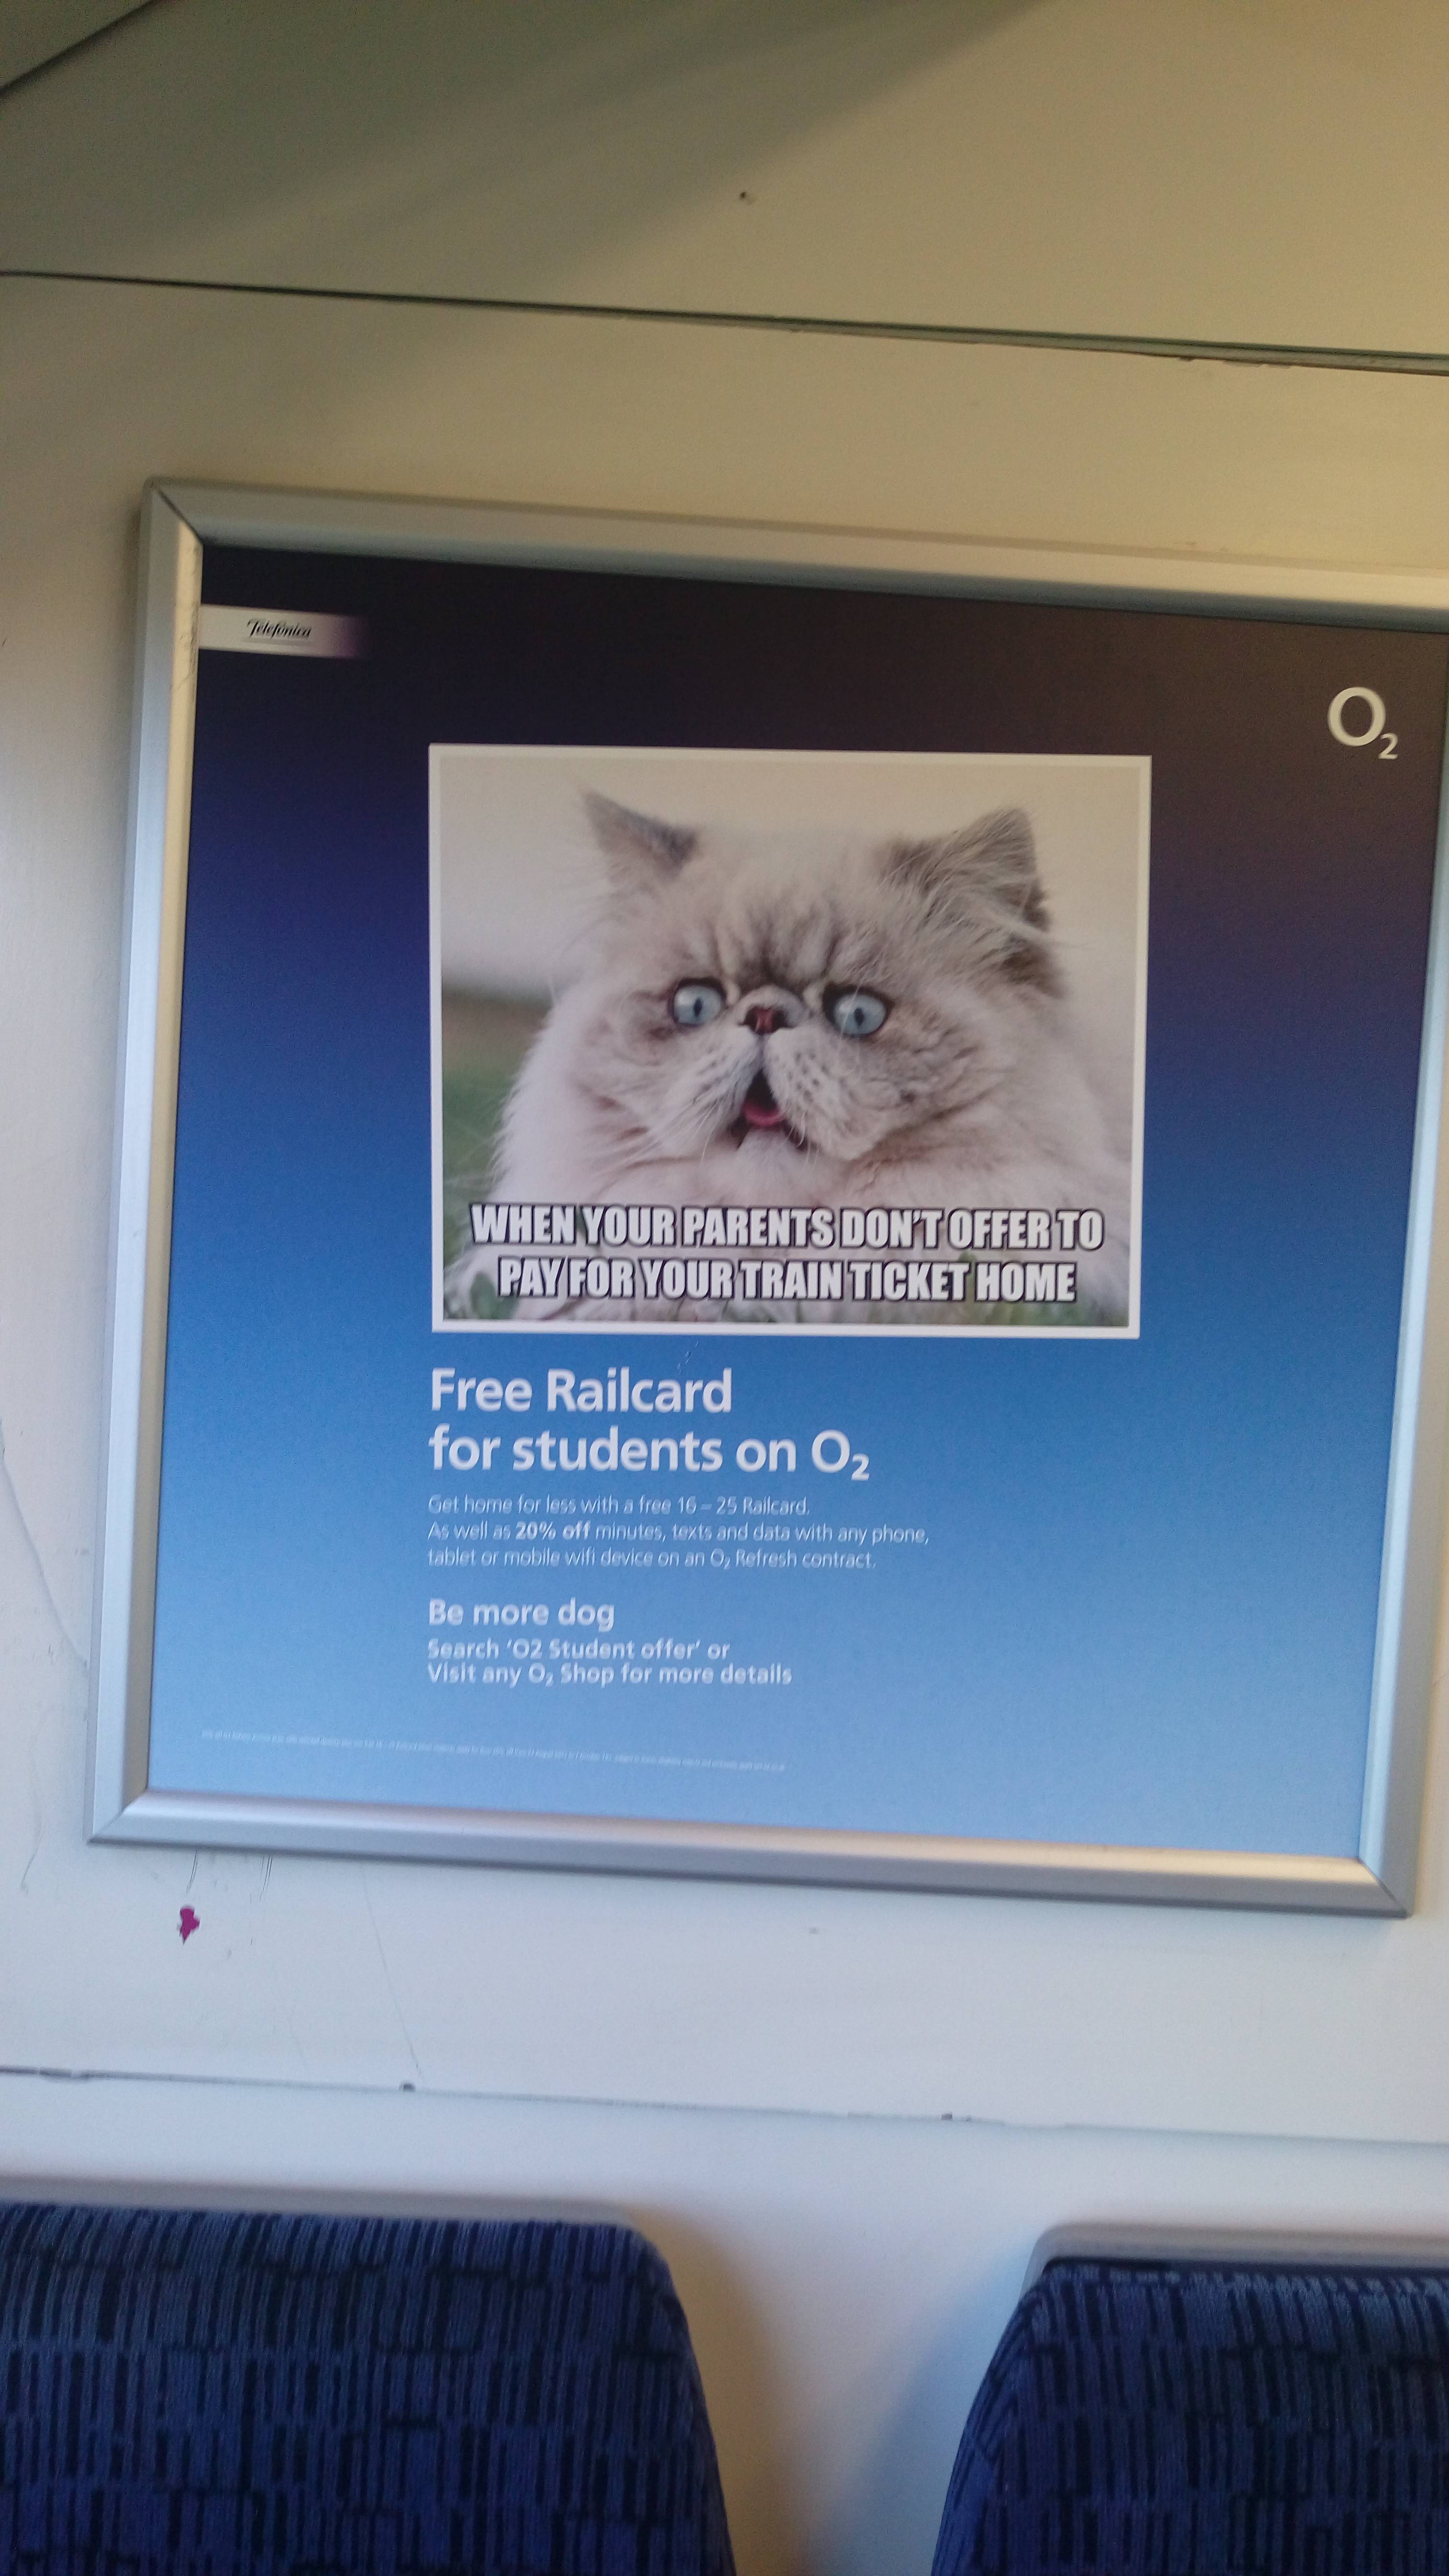 me gusta cat - When Your Parents Dont Offer To Pay Foydun Train Ticket Nome Free Railcard for students on O